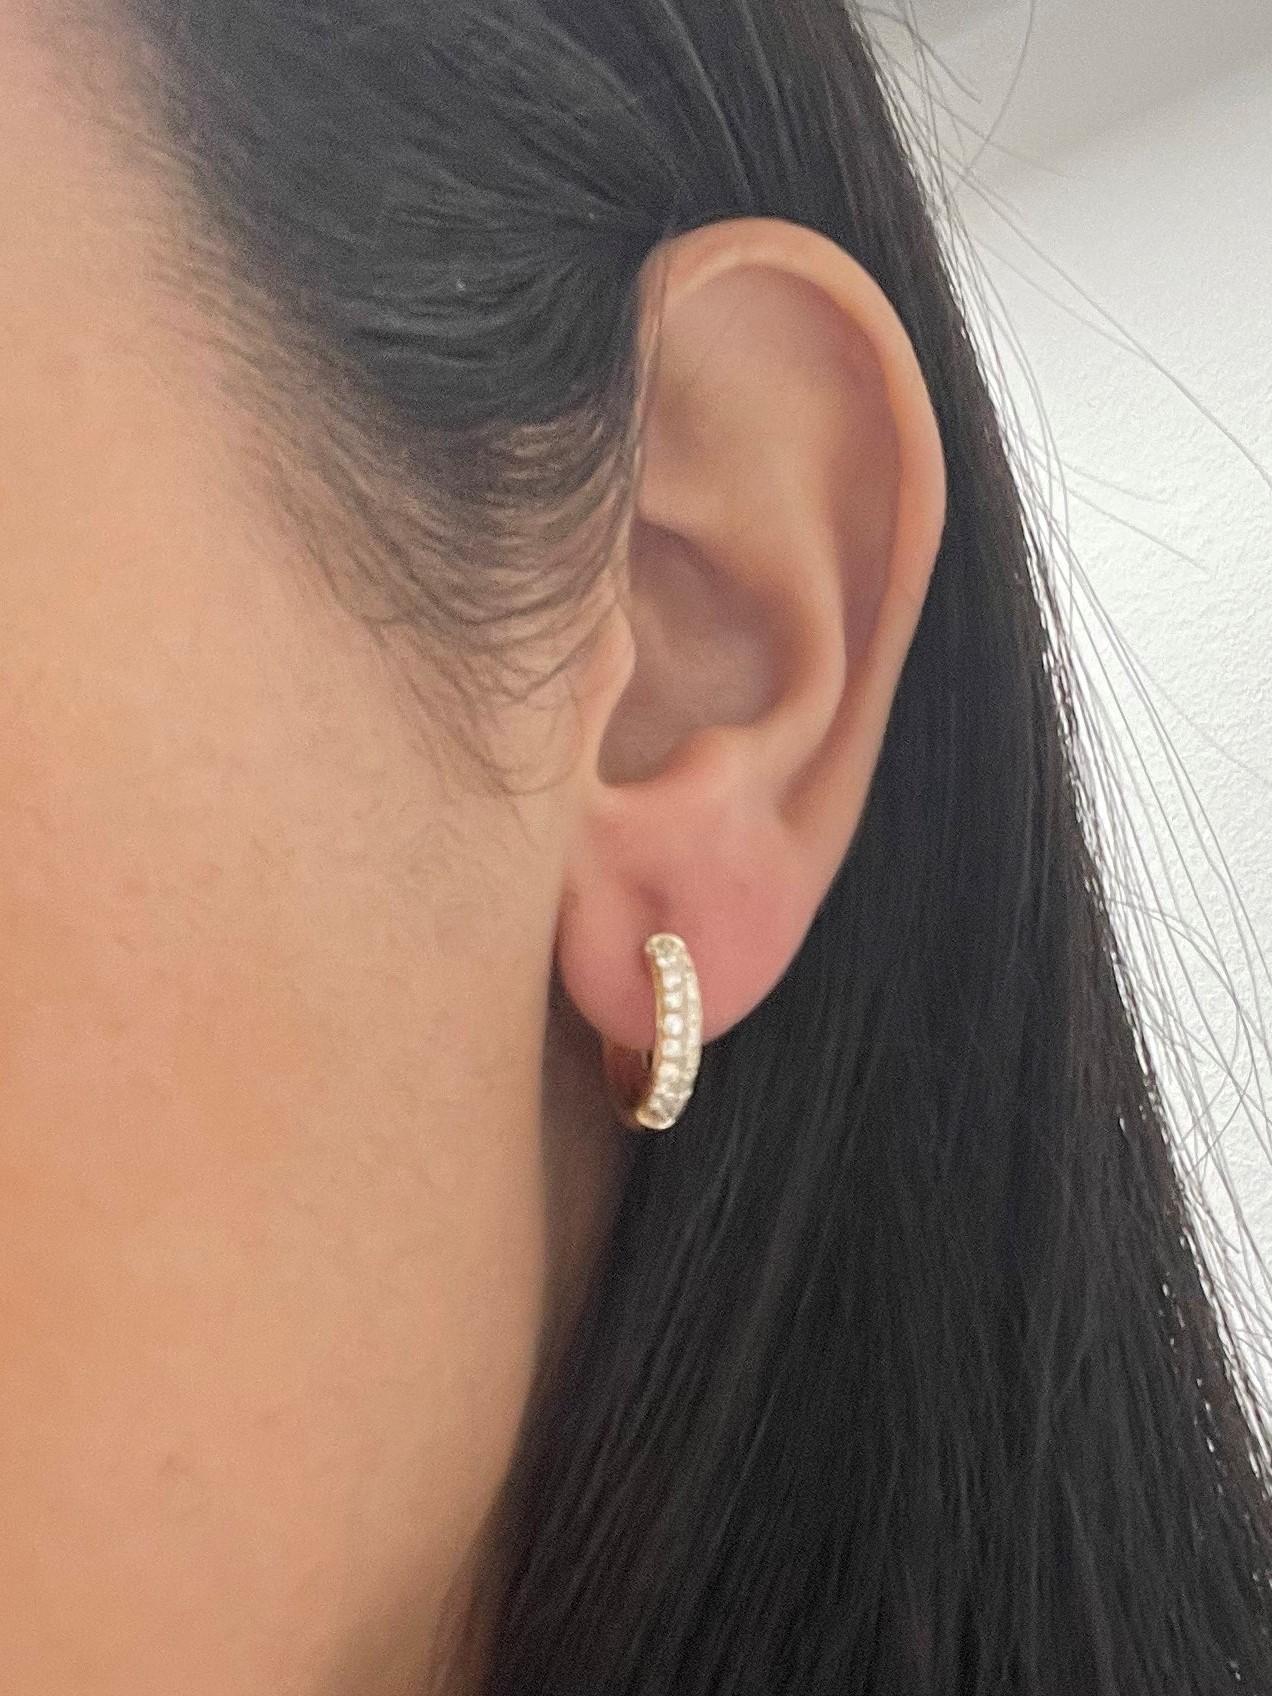 Quality Earrings Set: Made from real 14k gold and glittering white approximately 0.65 ct. Certified diamonds, featuring pave set white diamonds with a color and clarity of GH-SI 
 Surprise Your Loved Ones with Our Diamond Earrings For Her: If you